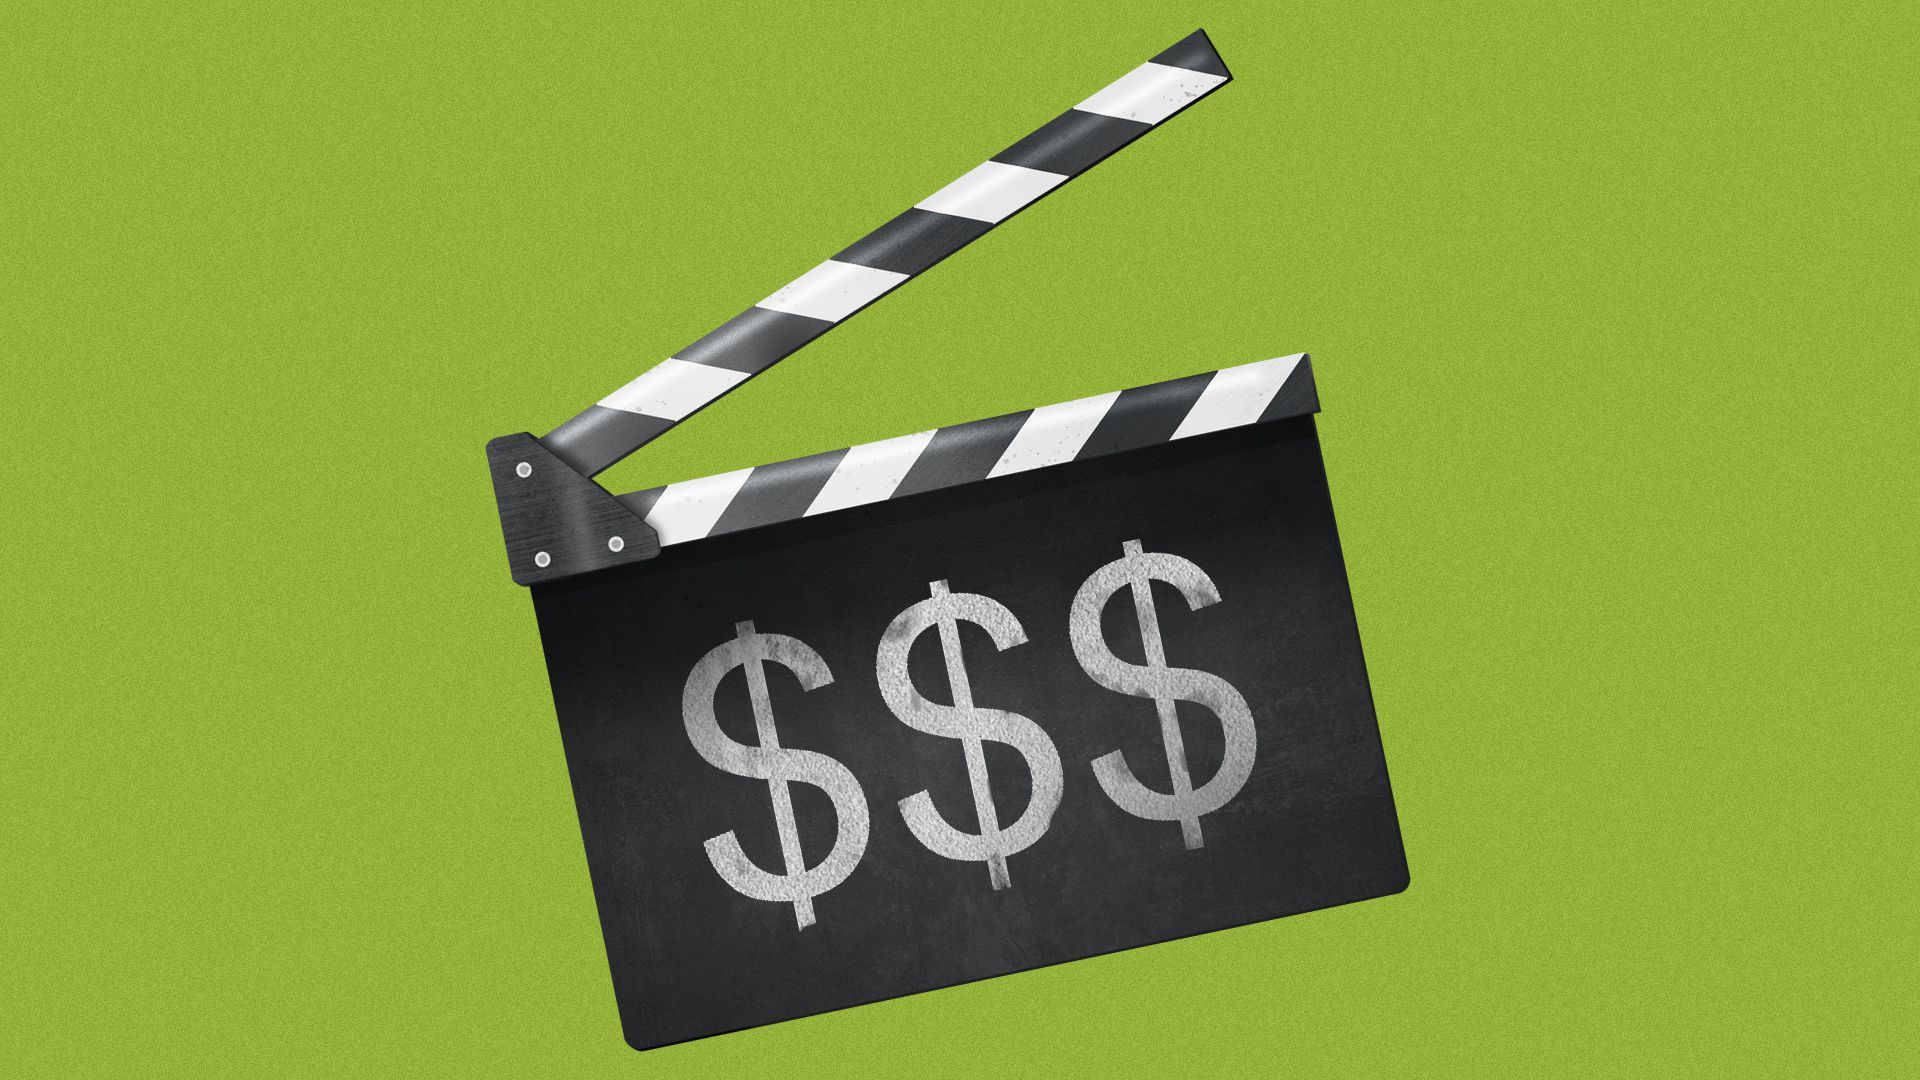 Illustration of a movie clapper board with dollar signs drawn on it